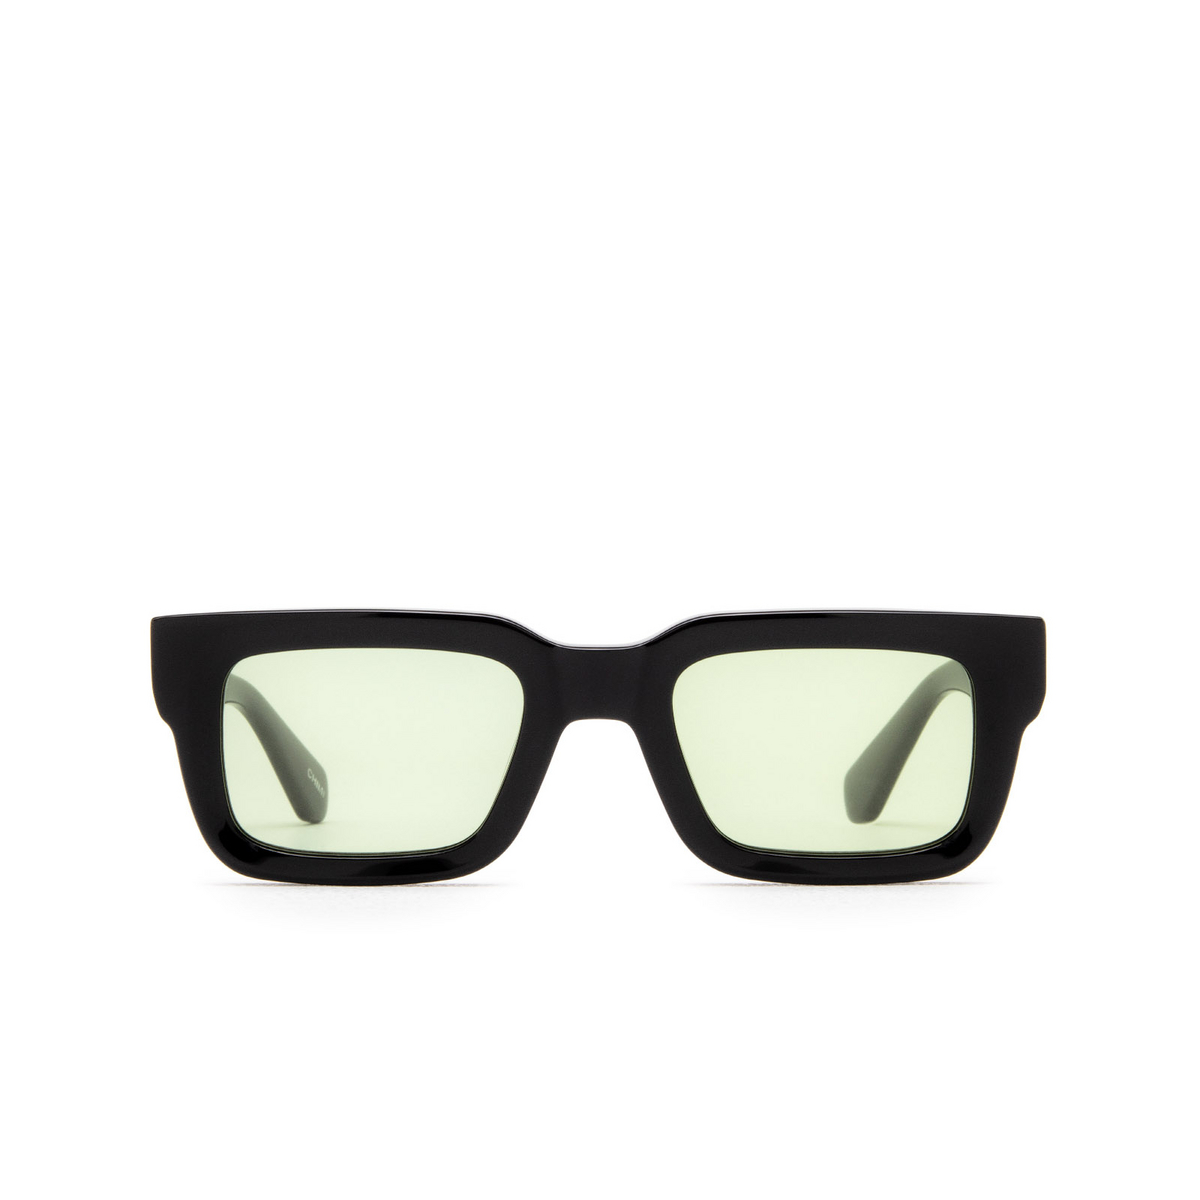 Chimi 05 Sunglasses BLACK GREEN - front view